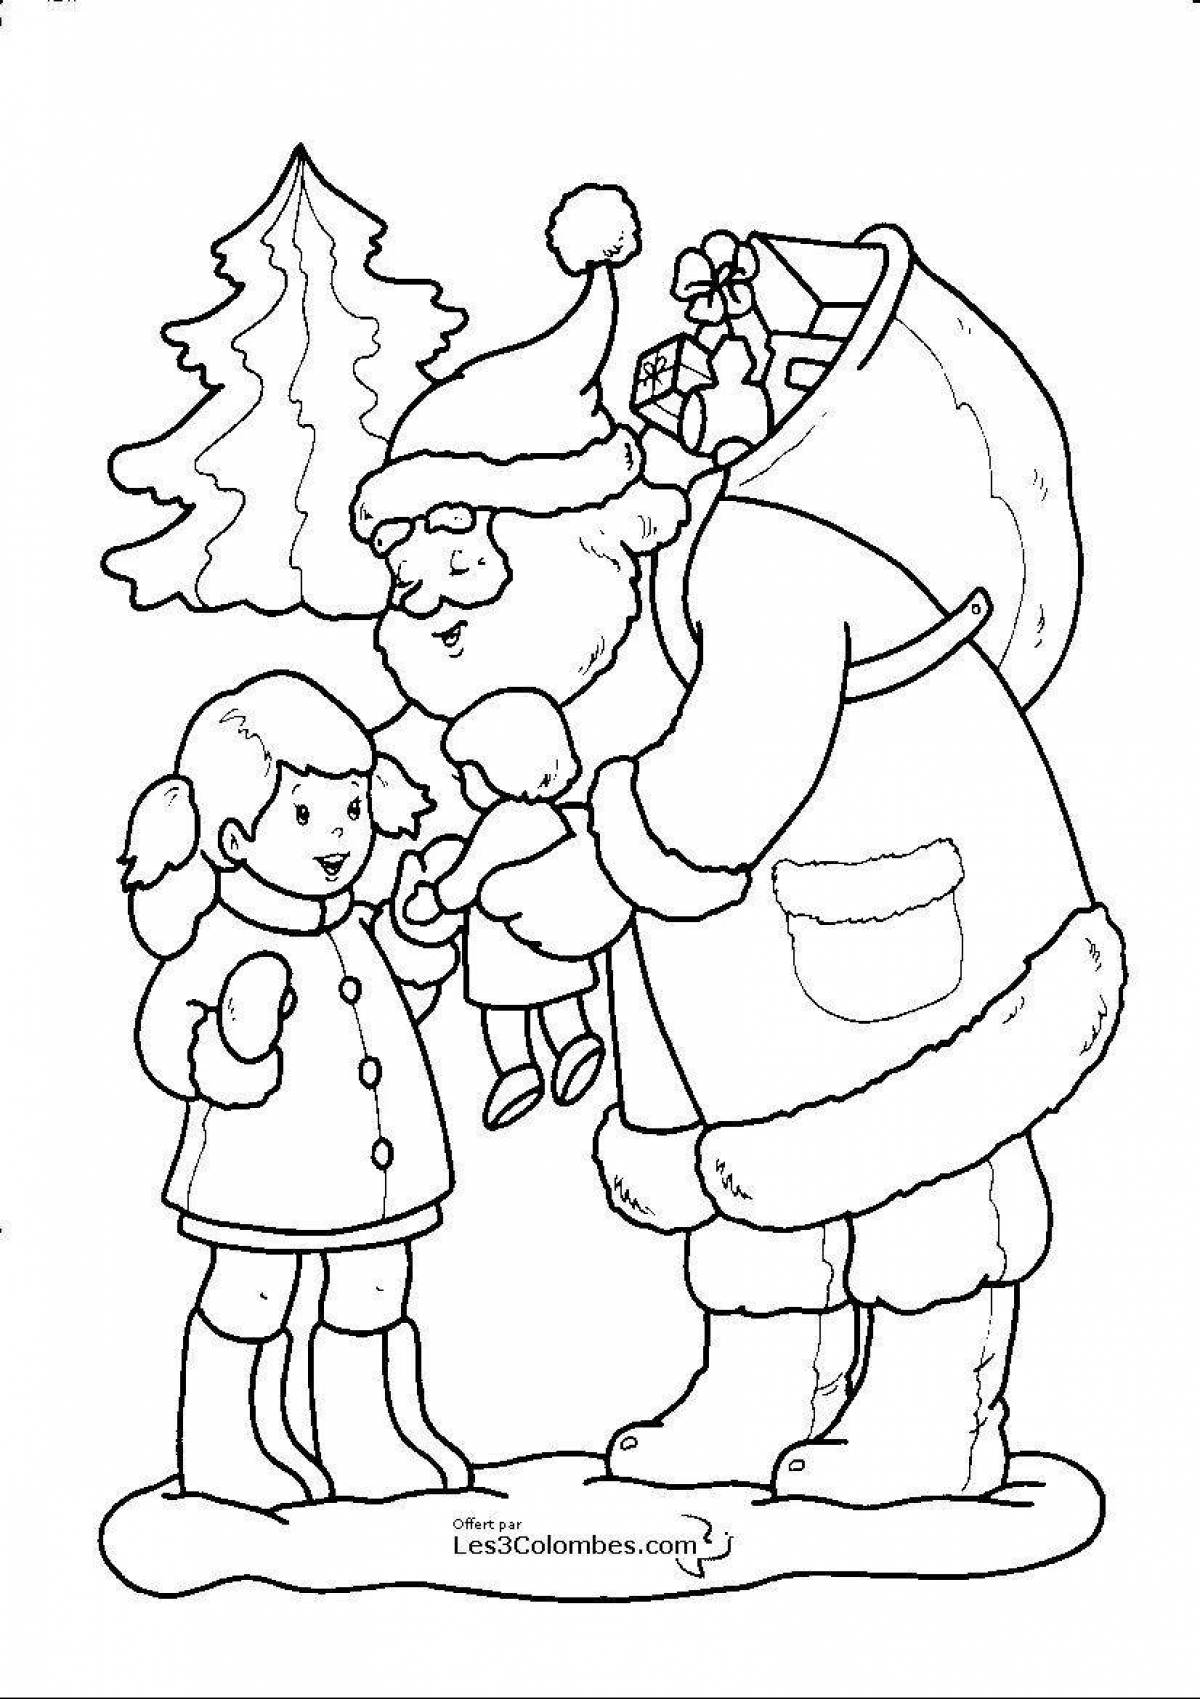 Shiny santa claus coloring book for girls